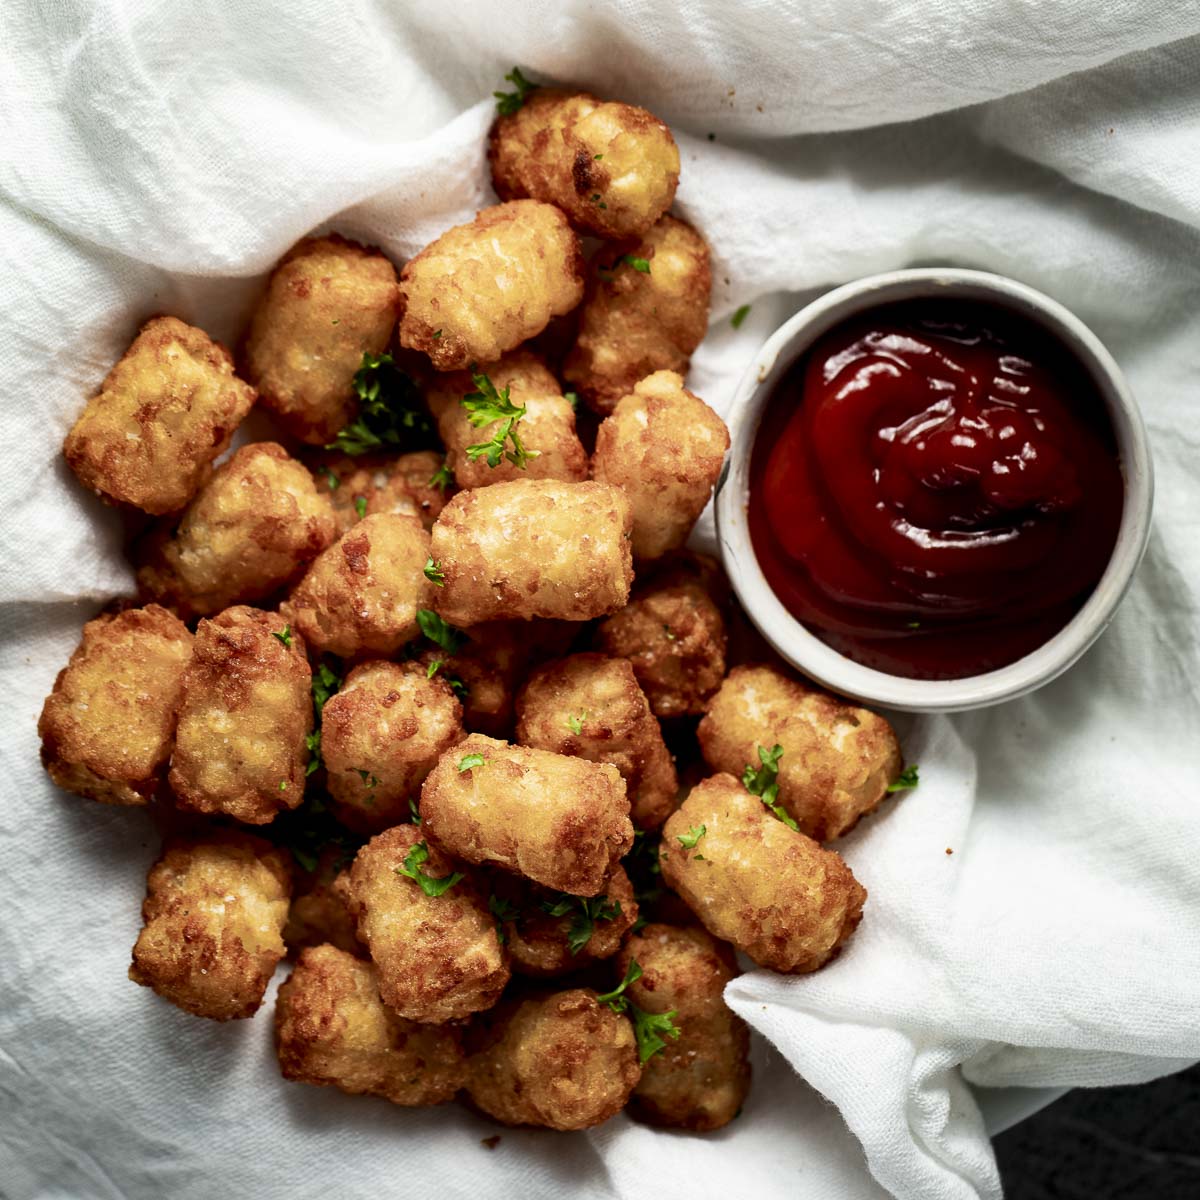 15 Minute Air Fryer Tater Tots - Midwest Foodie